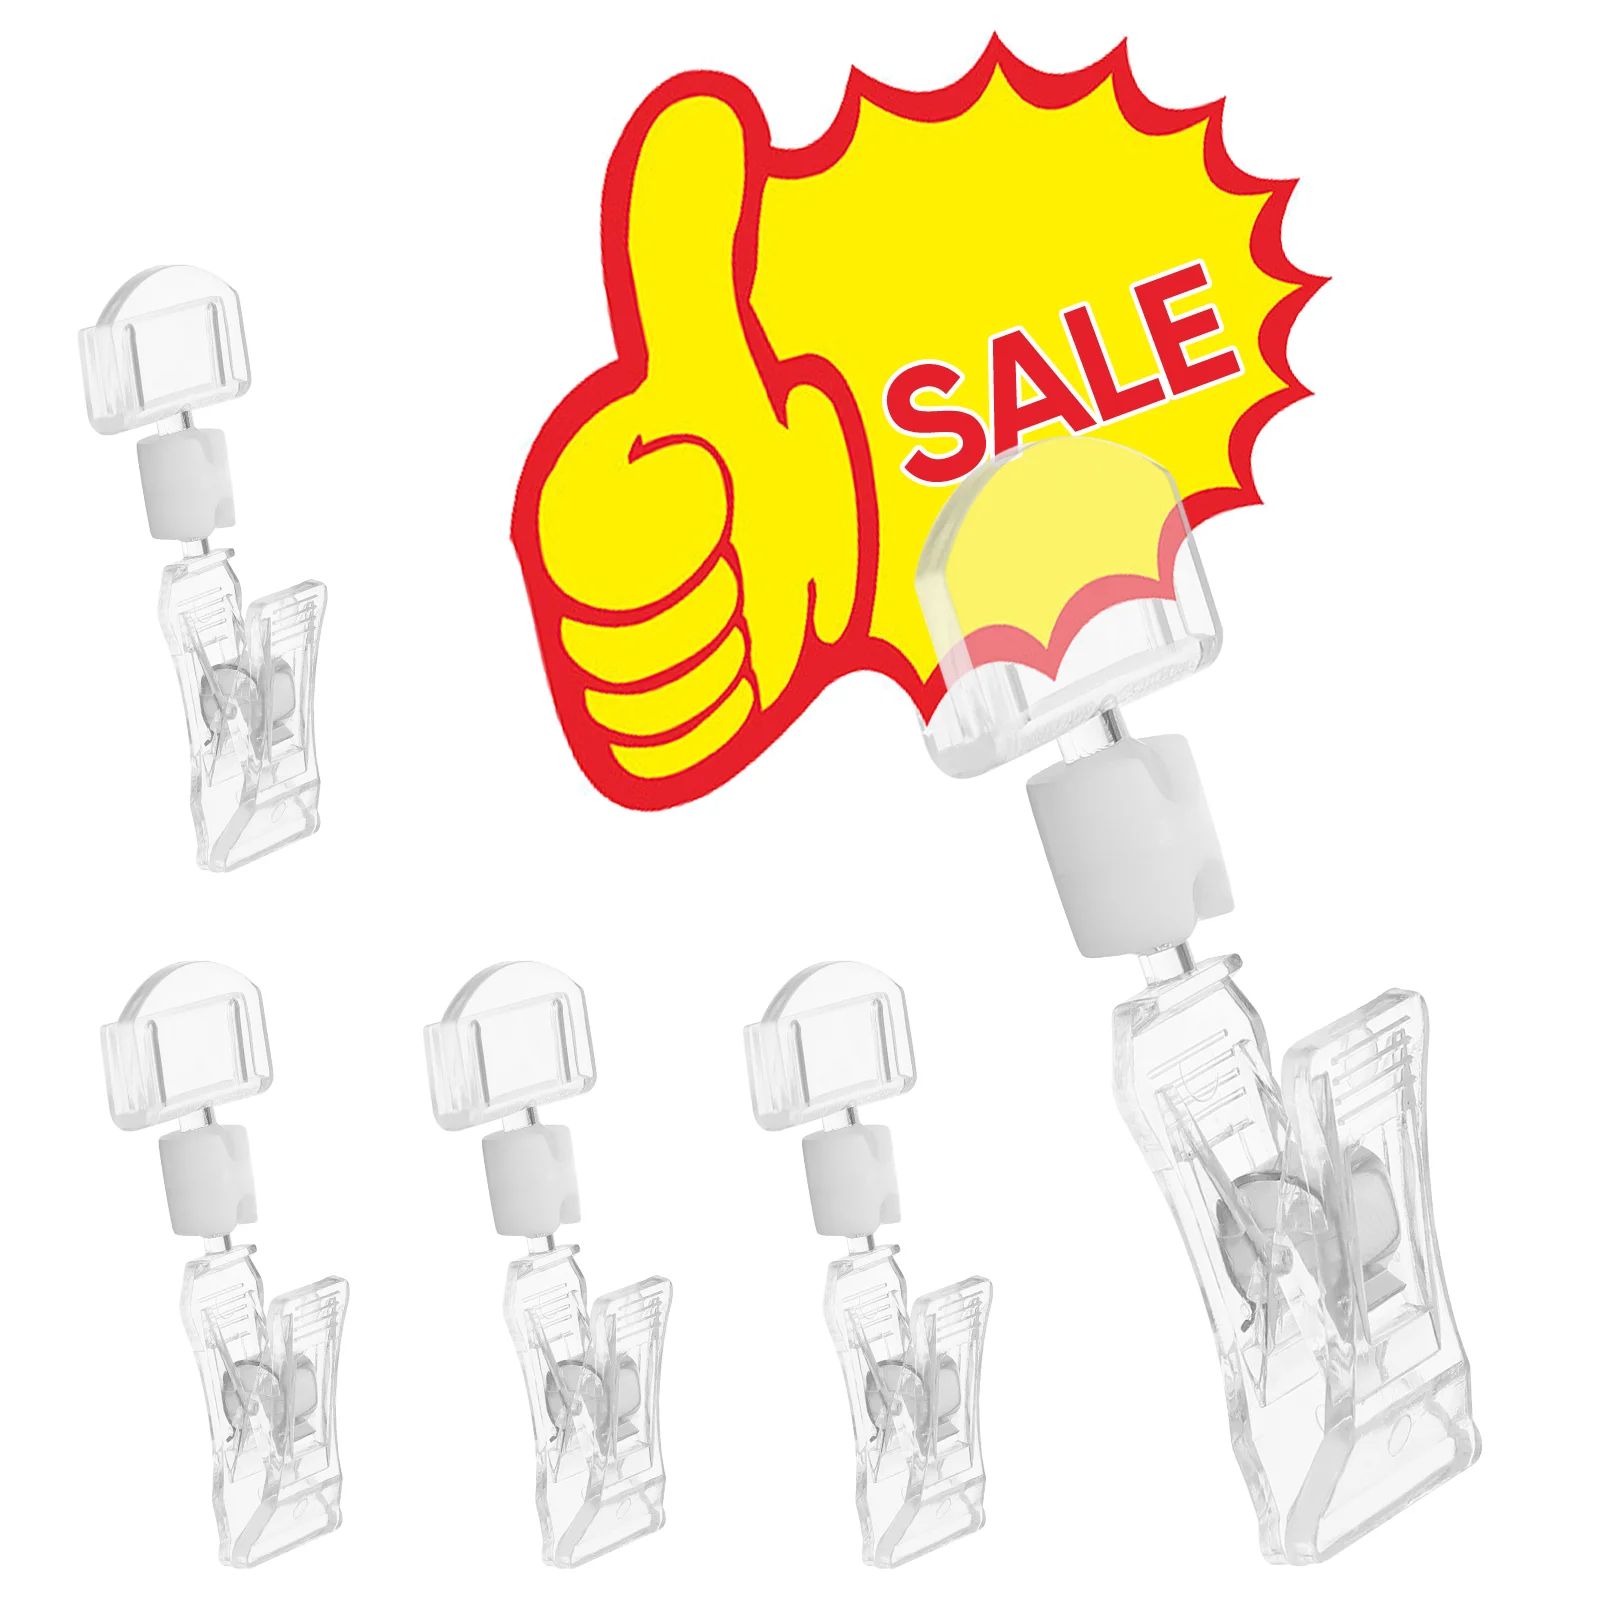 

10 Pcs Acrylic Advertising Folder Price Tag Display Holder Clear Plastic Serving Tray Clip Supermarket Hangers Stand Sign Coat